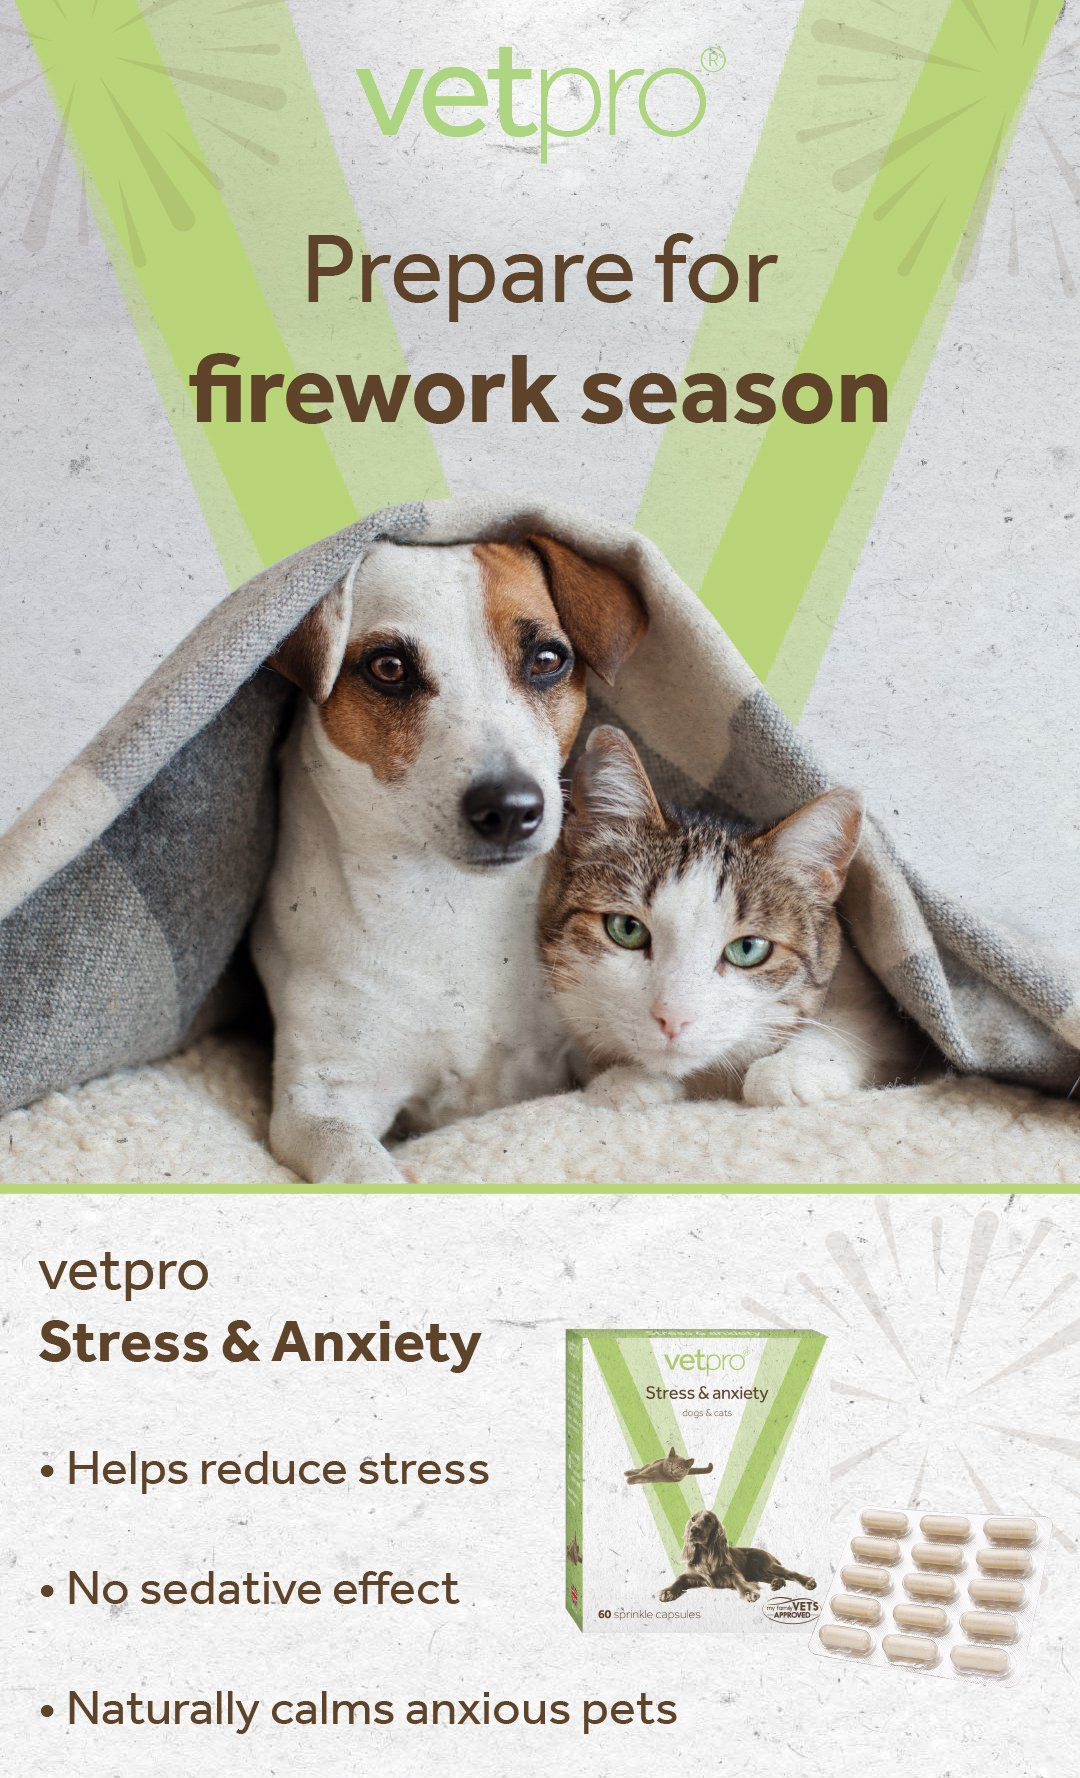 VetPro Stress and Anxiety capsules for dogs and cats